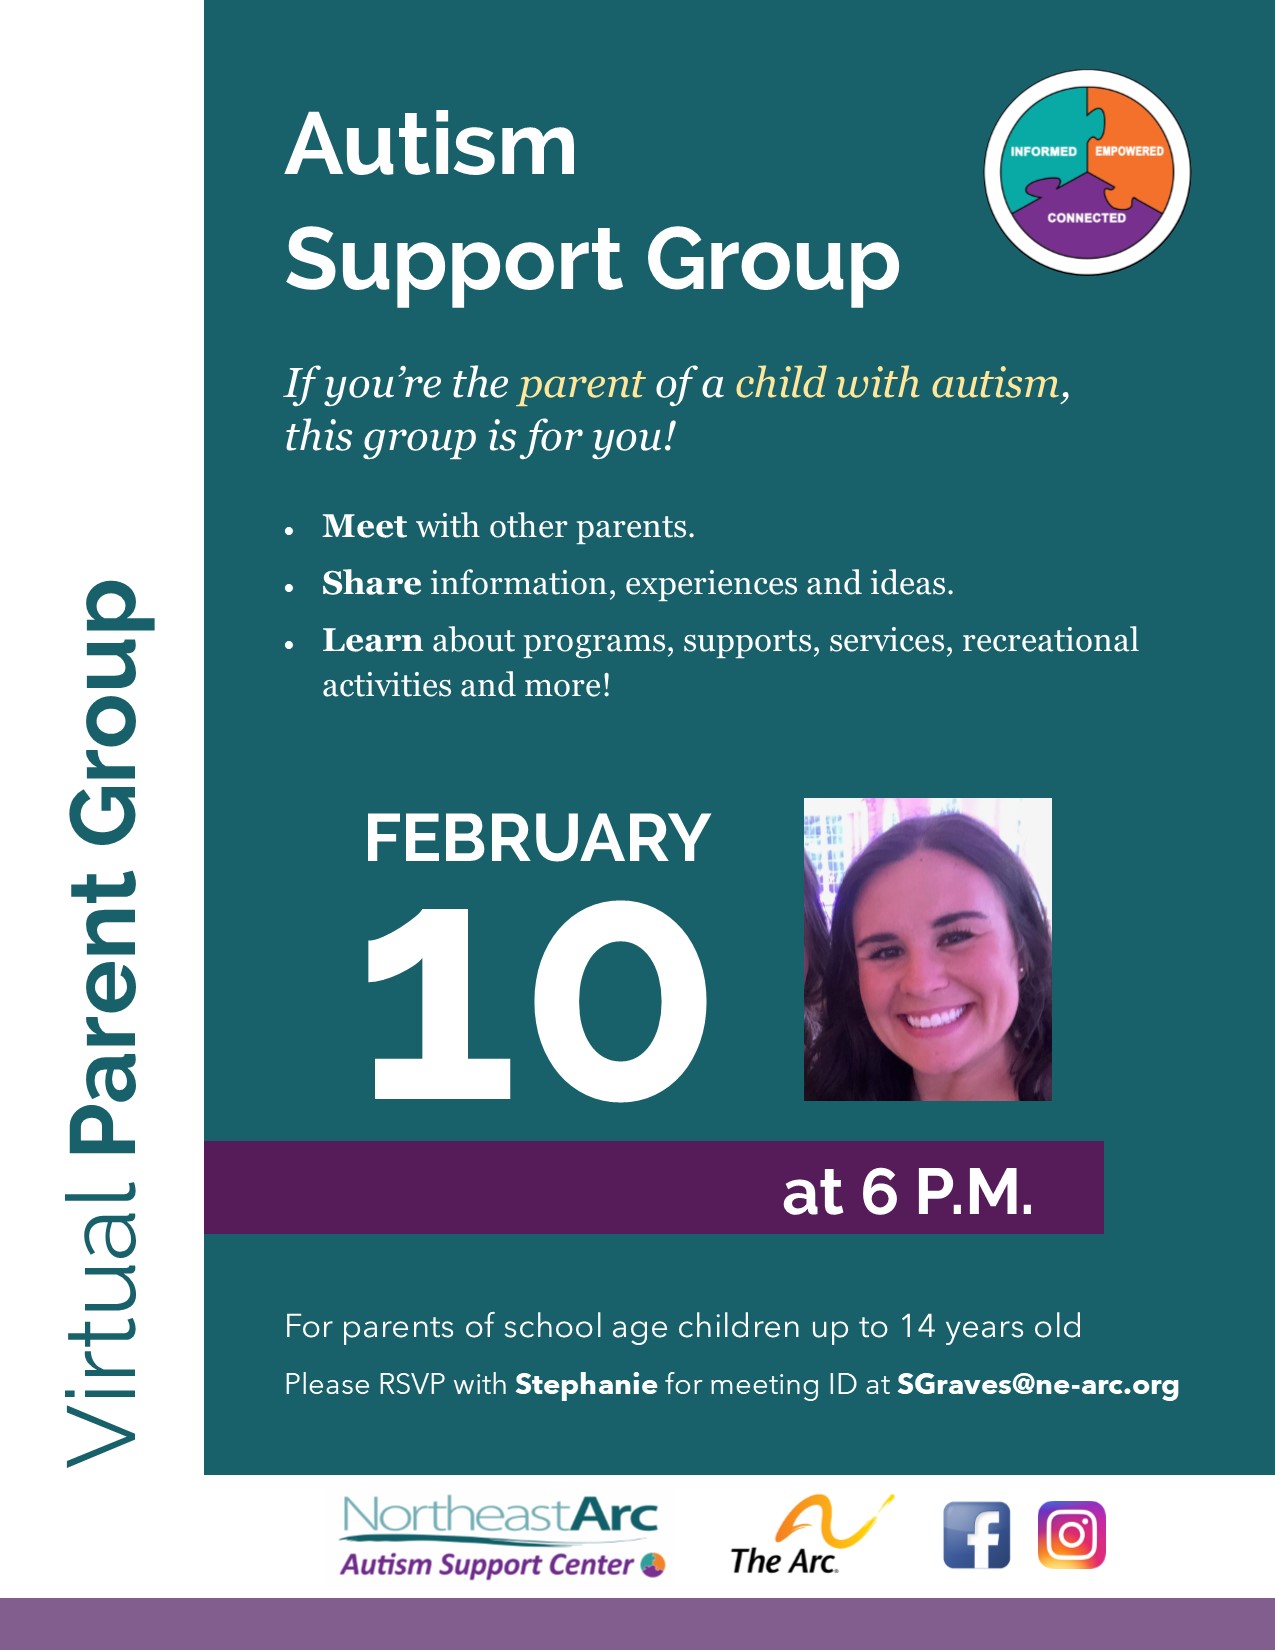 Flyer for Autism Support Center Virtual Parent Support Group on February 10 at 6PM for Parents for School Age Children. RSVP Stephanie at SGraves@ne-arc.org for zoom meeting link.